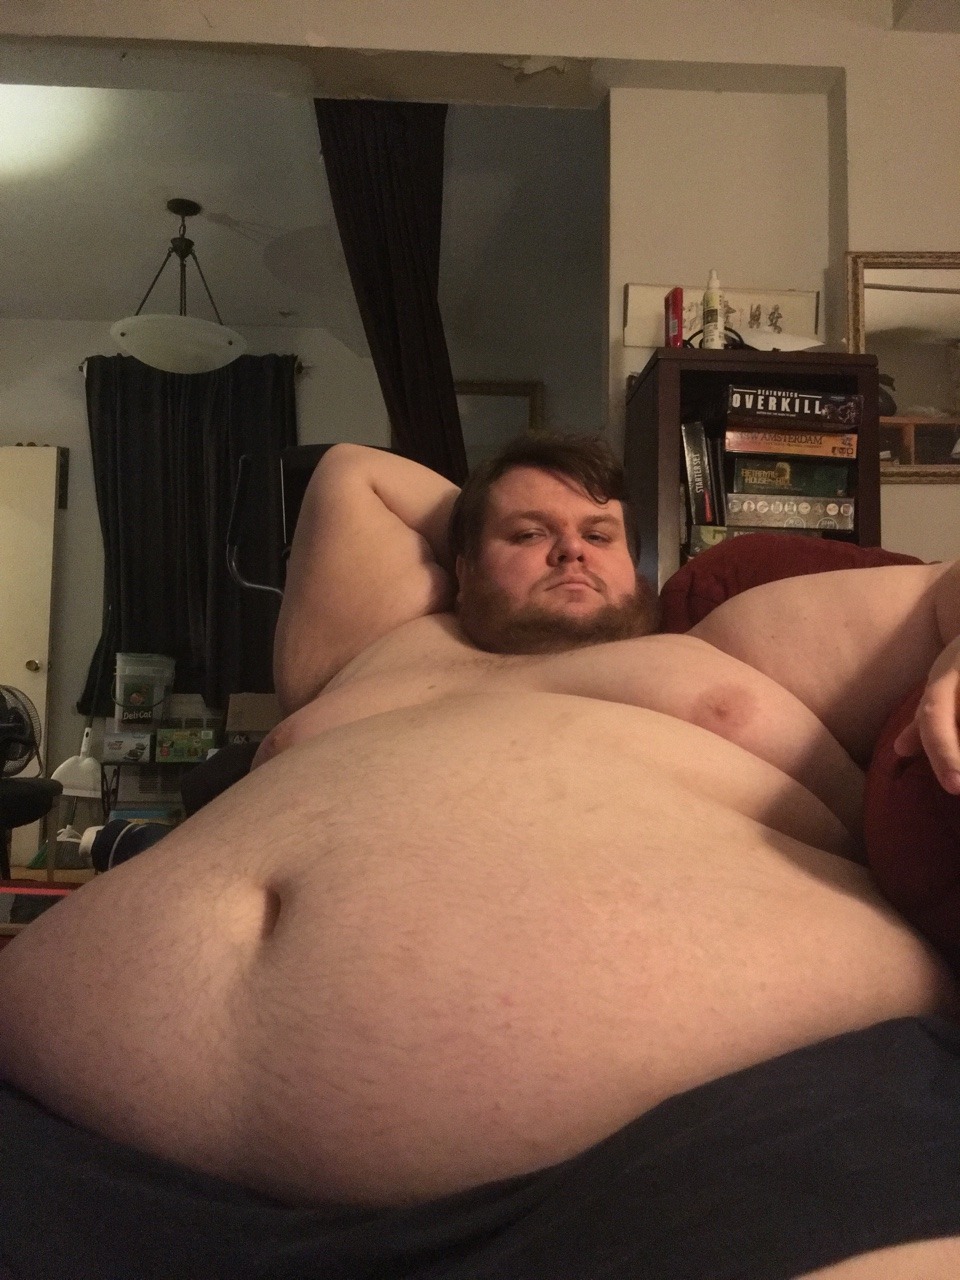 fatbestfriend:  Can you guess my sexy secret? 😉 I’m filled with thousands of